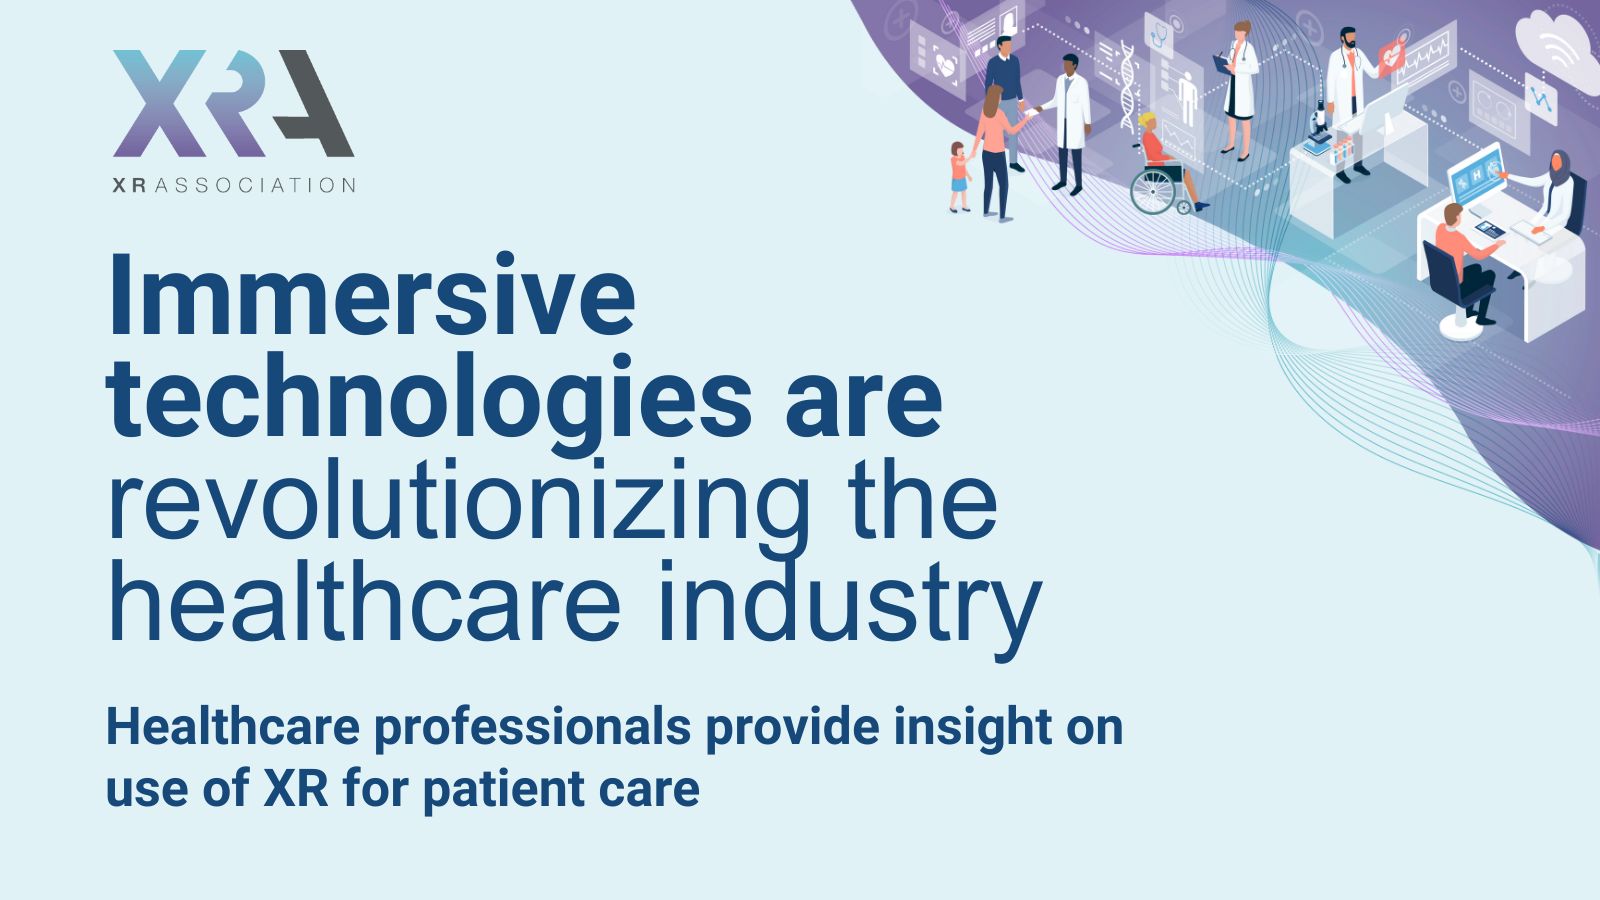 NEW SURVEY HIGHLIGHTS THE GROWING ROLE OF XR TECHNOLOGY IN THE MODERN HEALTHCARE SYSTEM